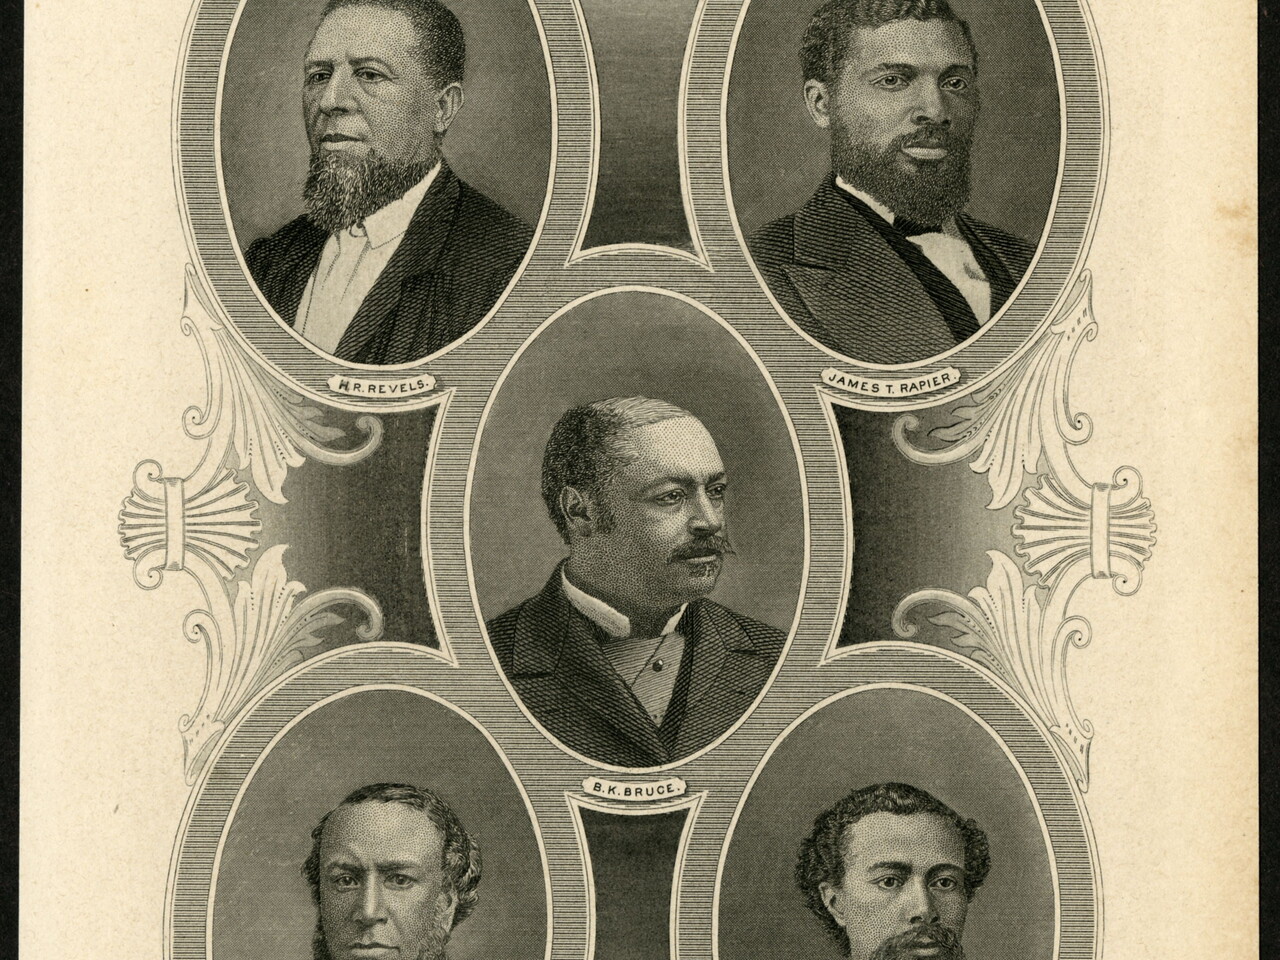 African American members of Congress during Reconstruction